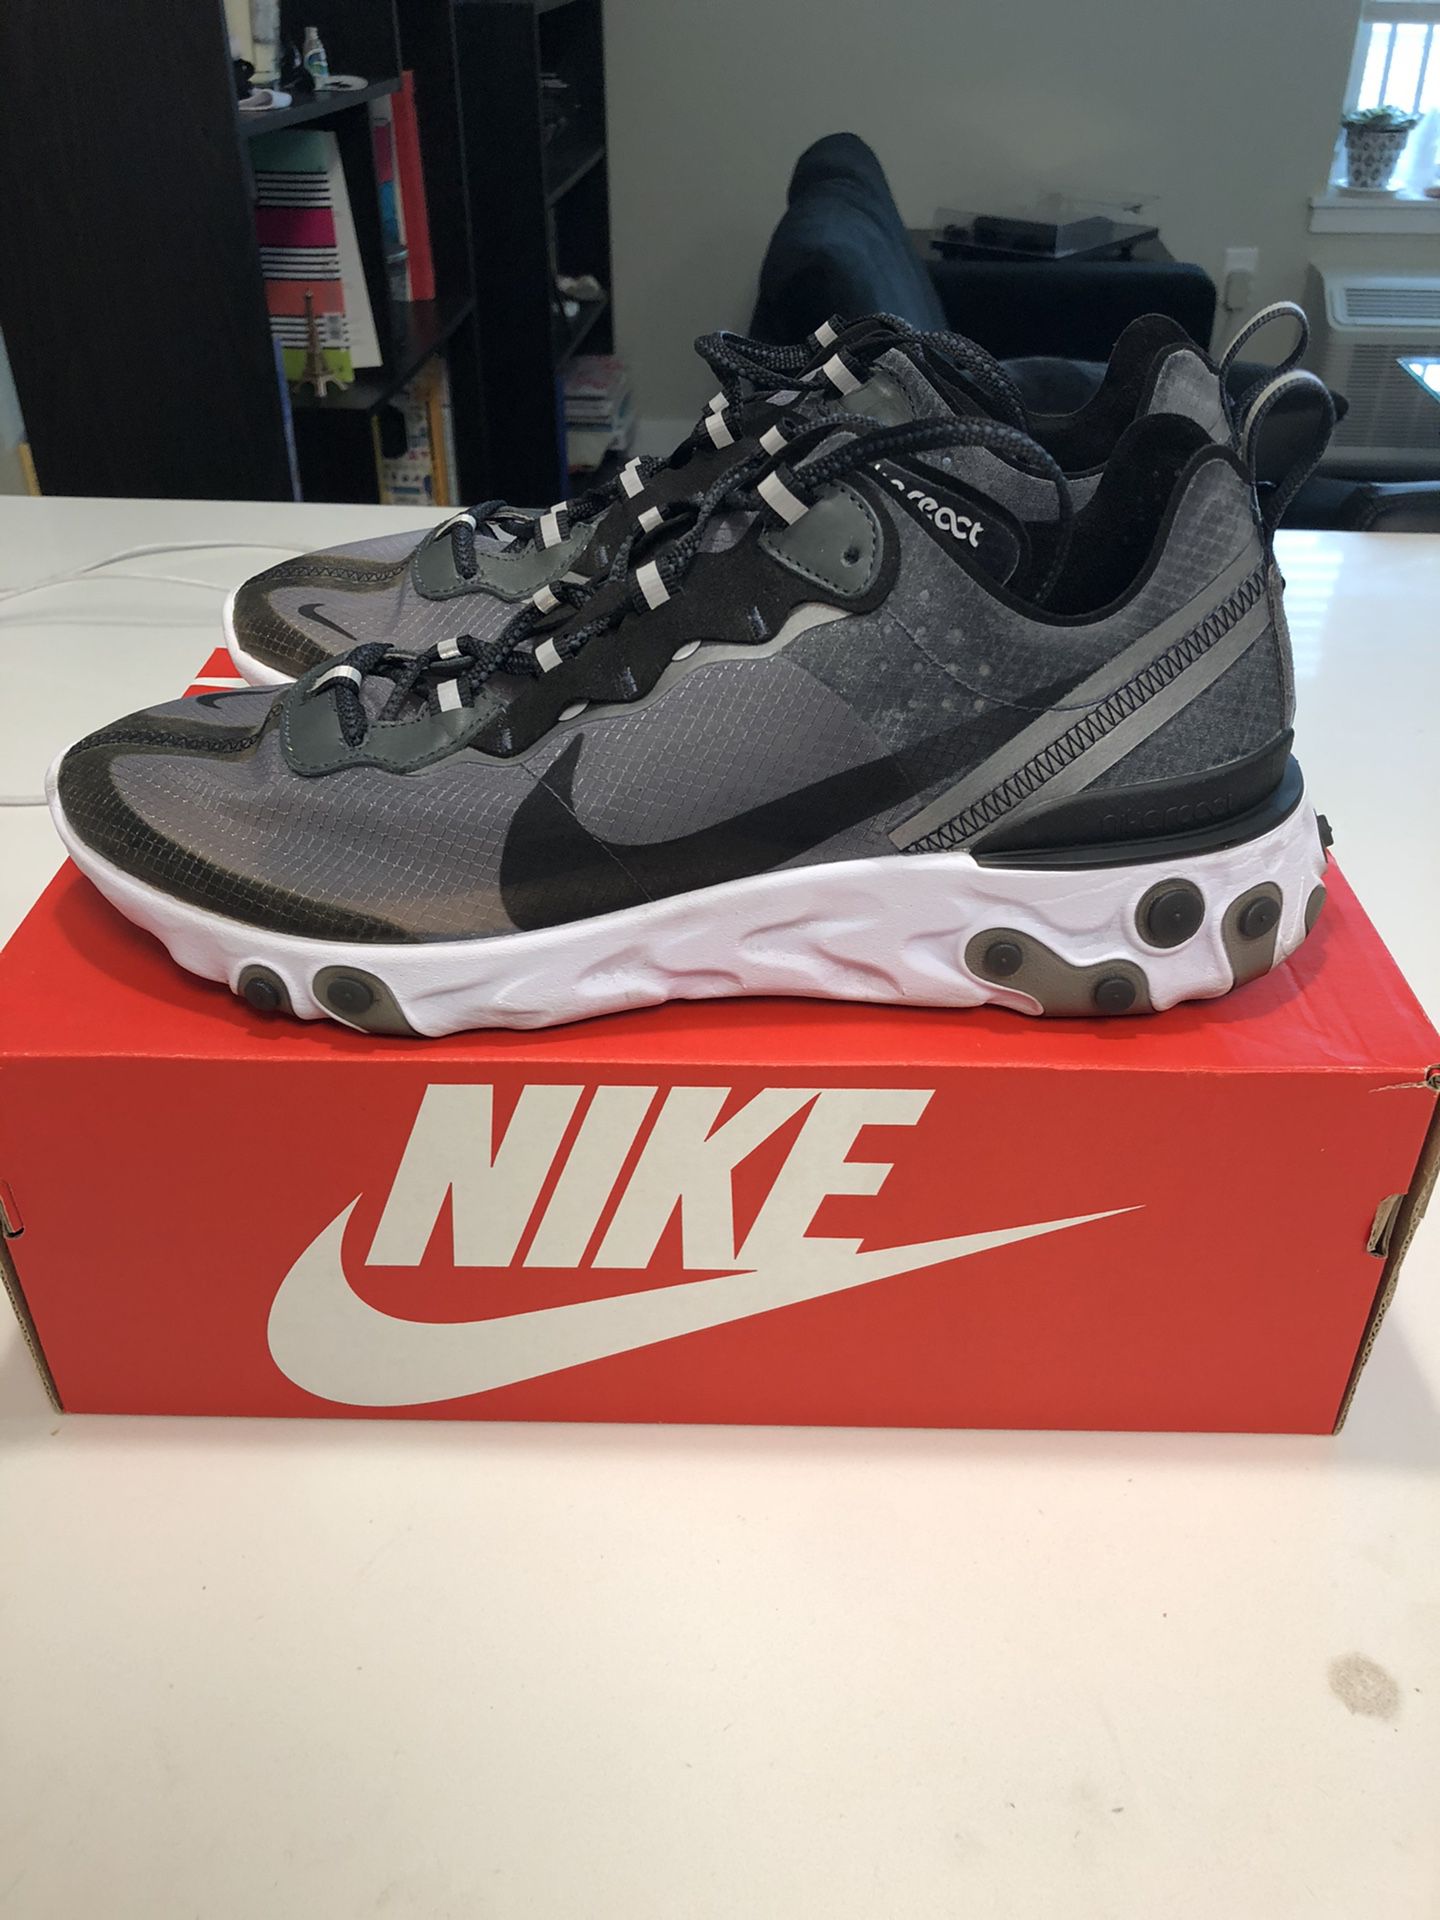 Nike React Element 87 Anthracite size 11